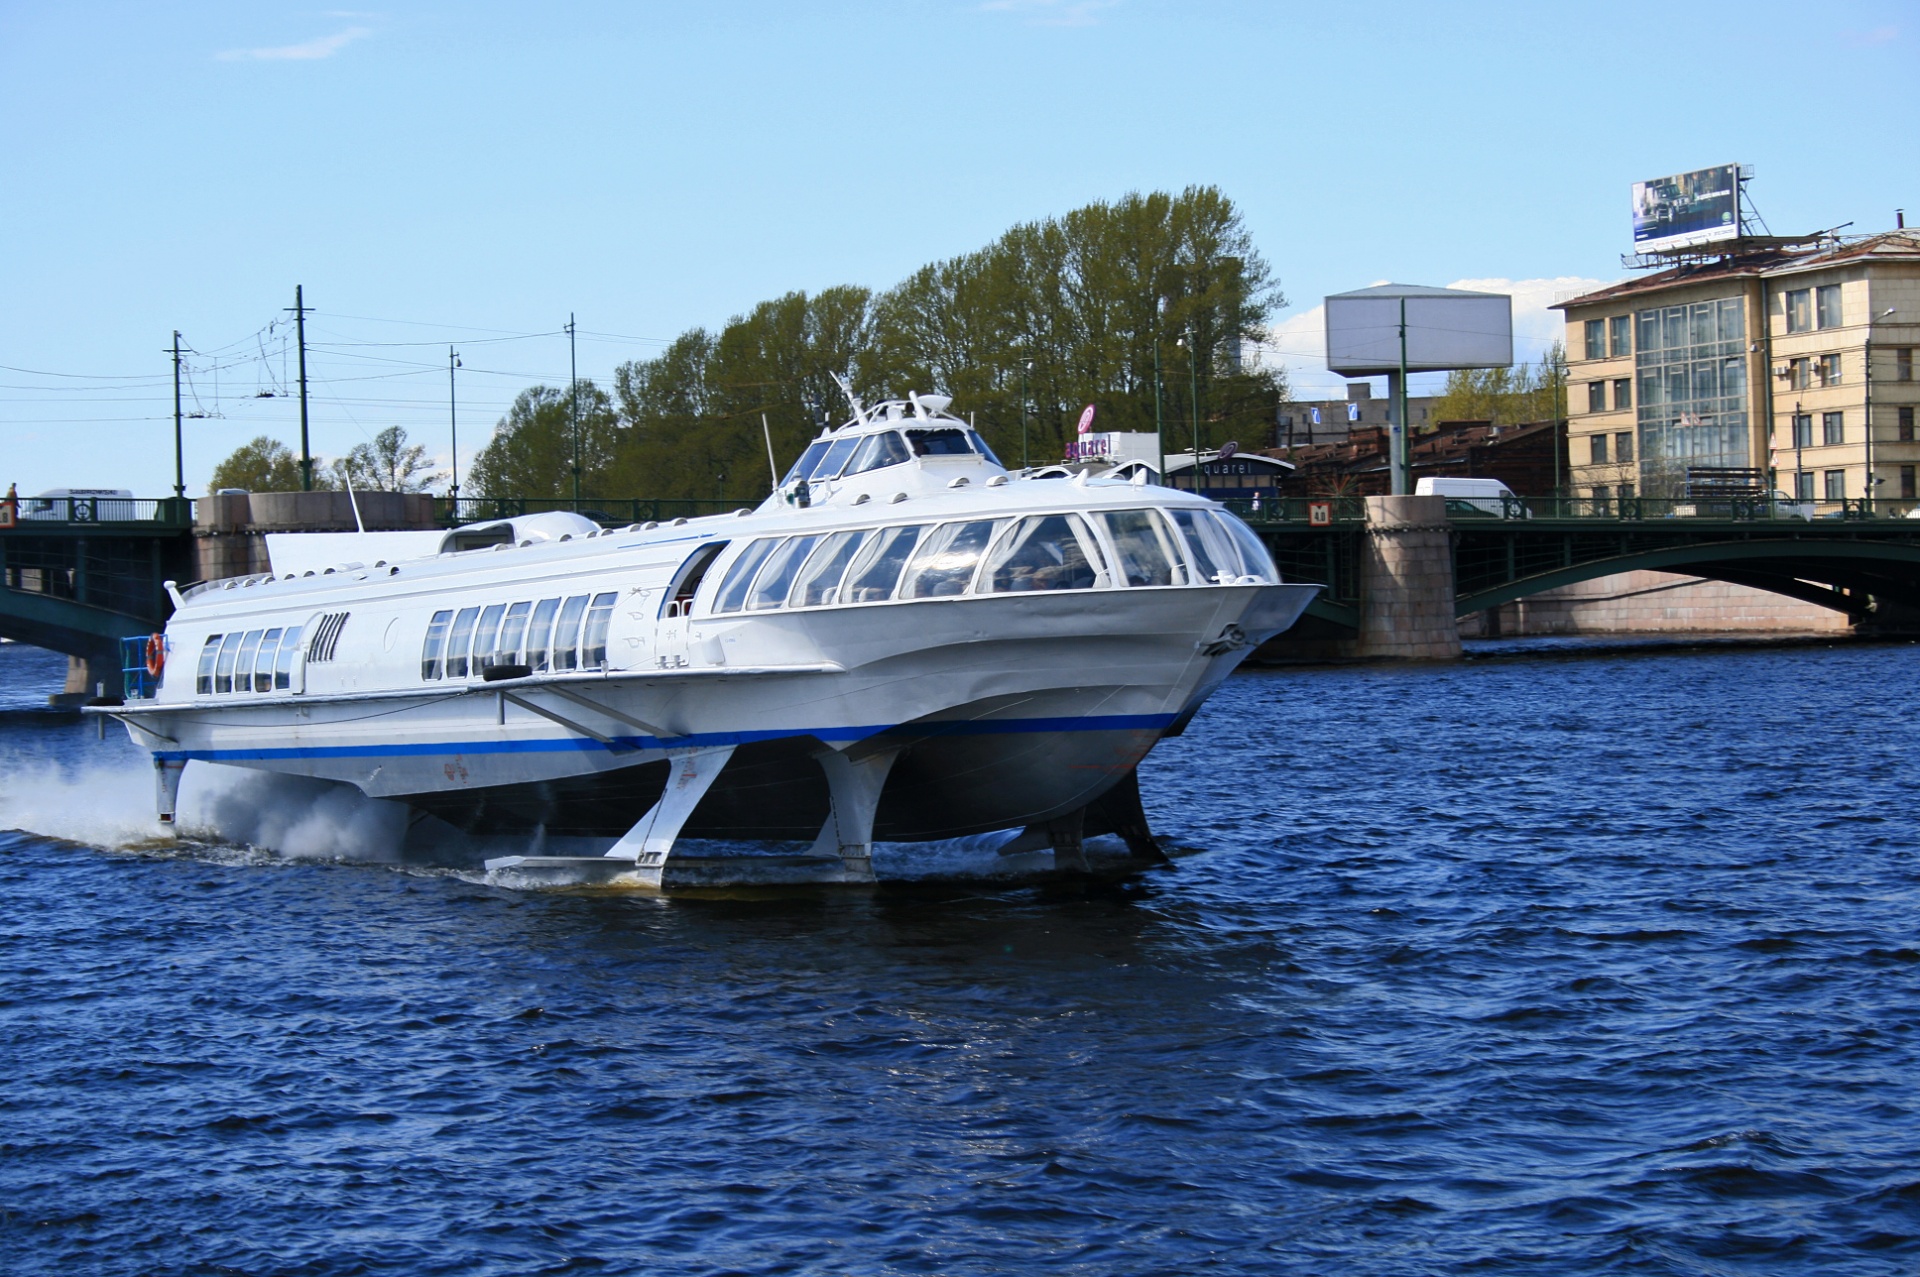 hydrofoil on the neva river in saint petersburg, russia